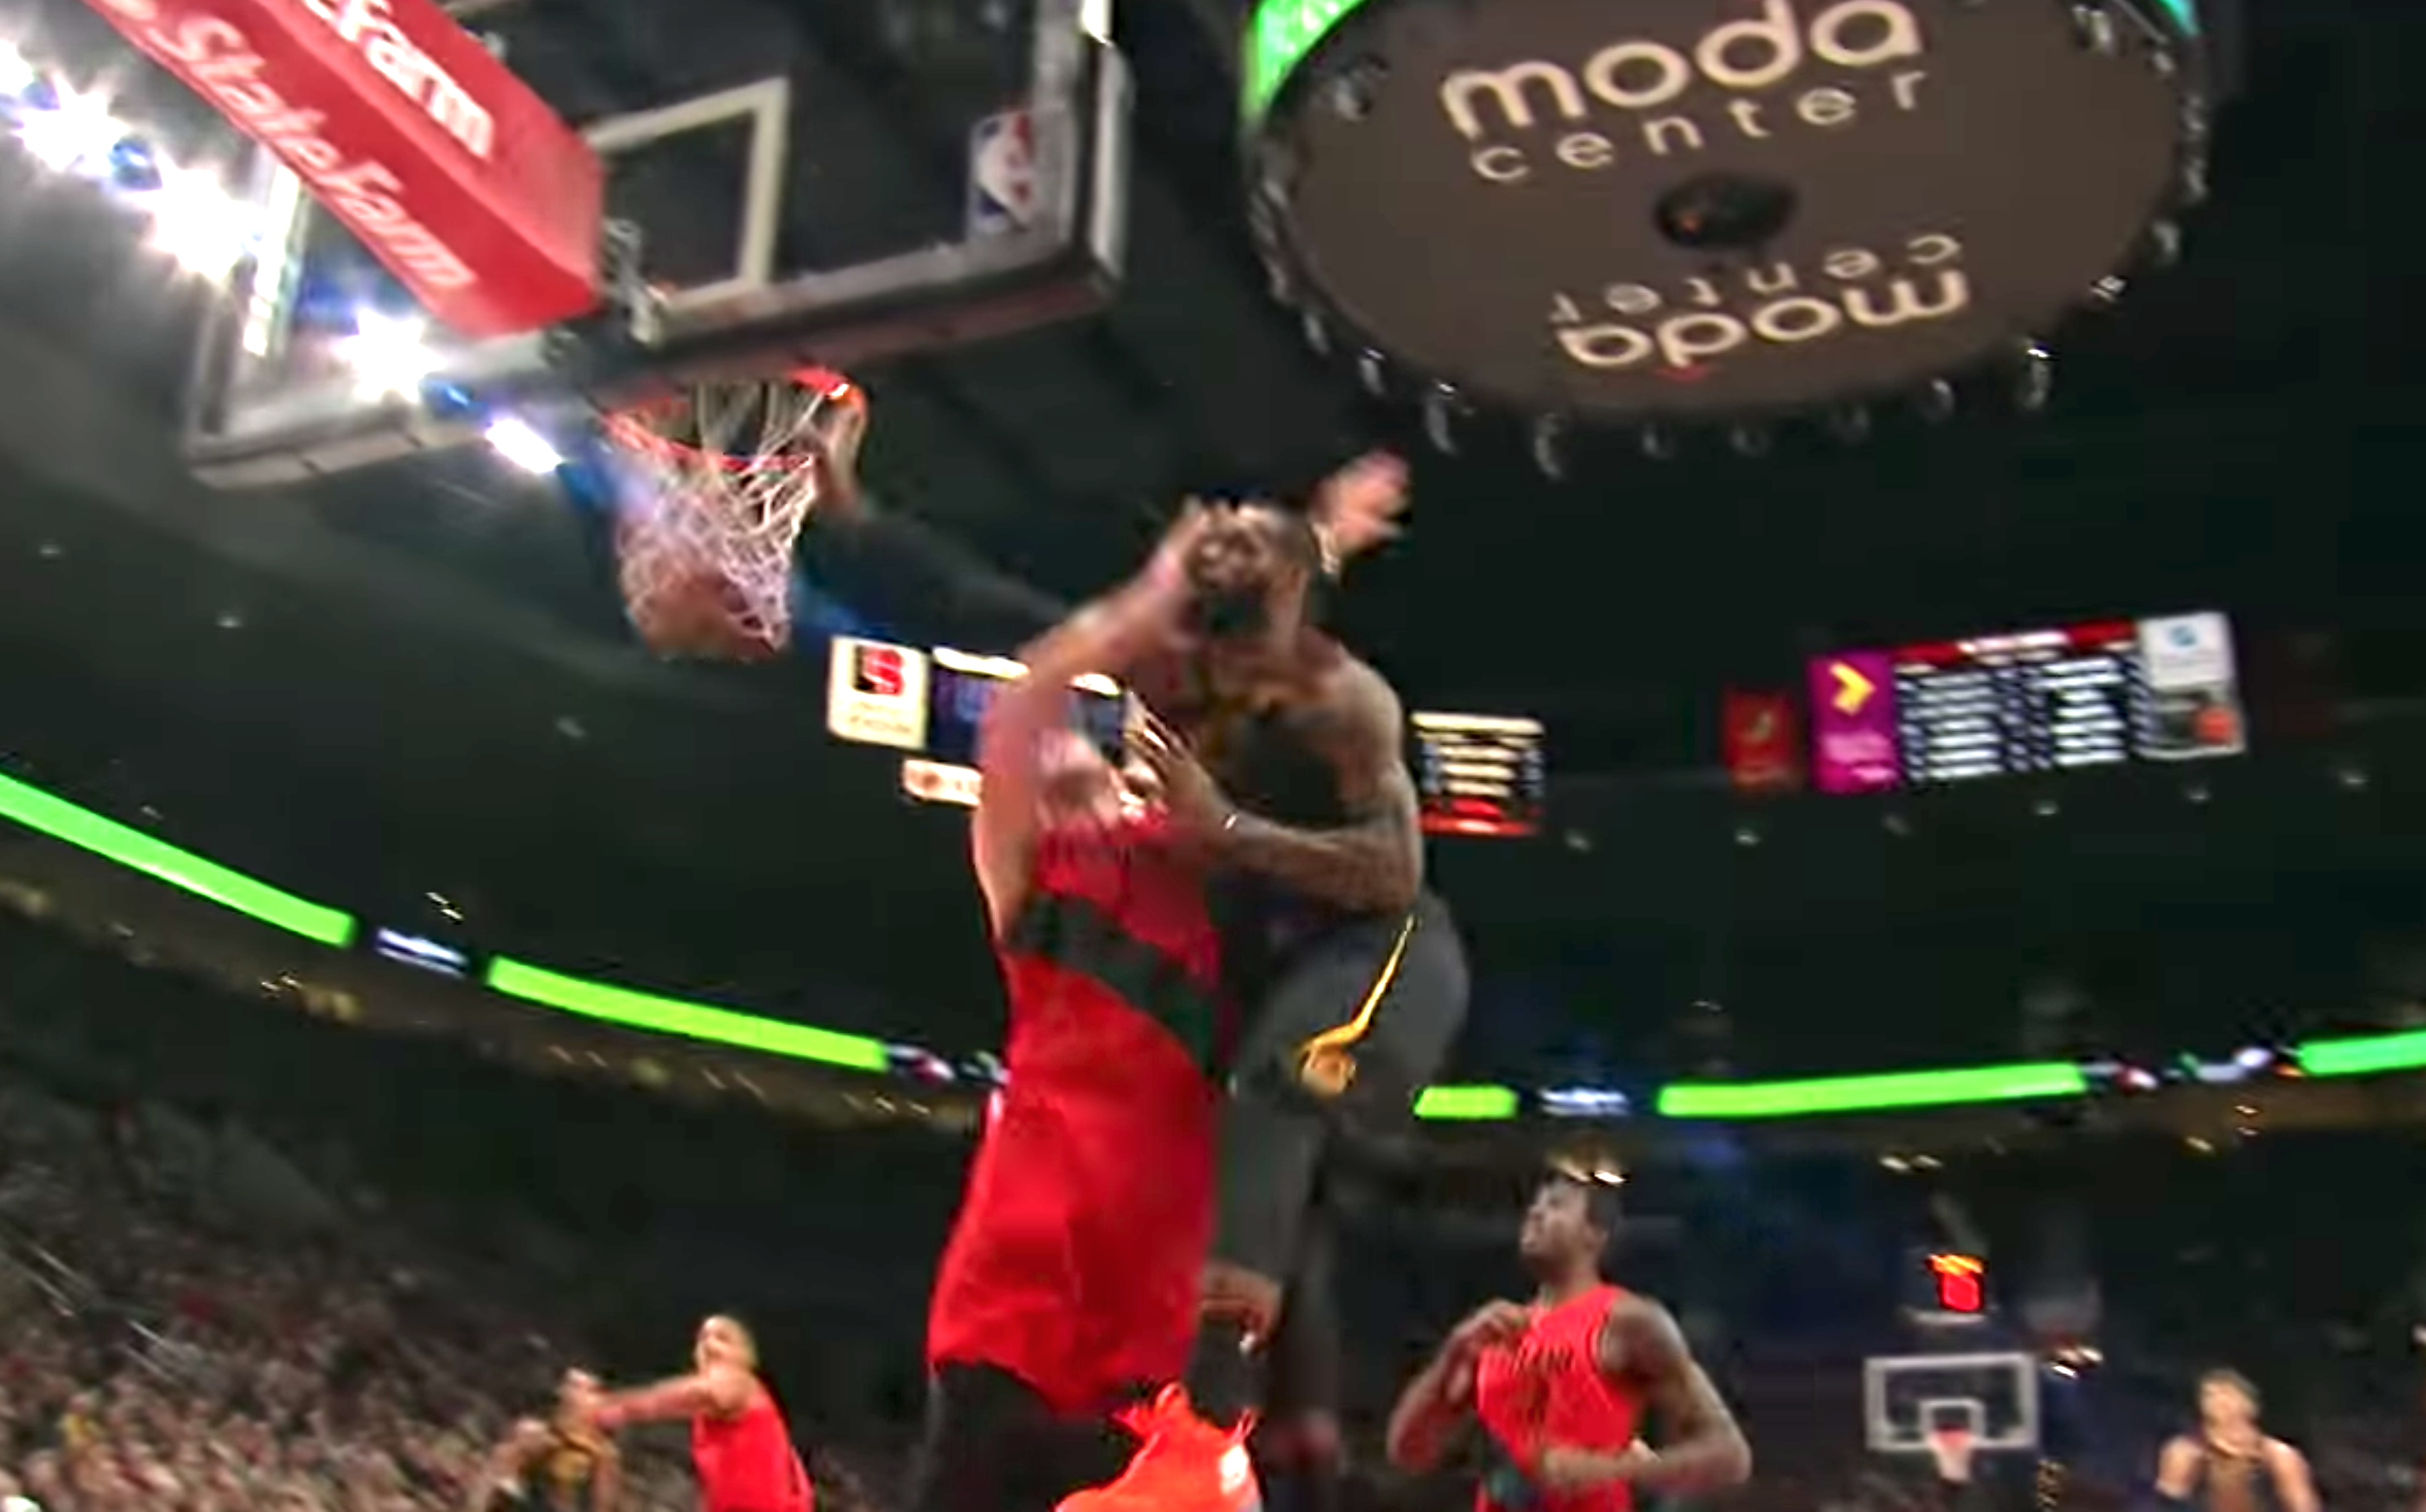 LeBron James throws down epic dunk on Jusuf Nurkic